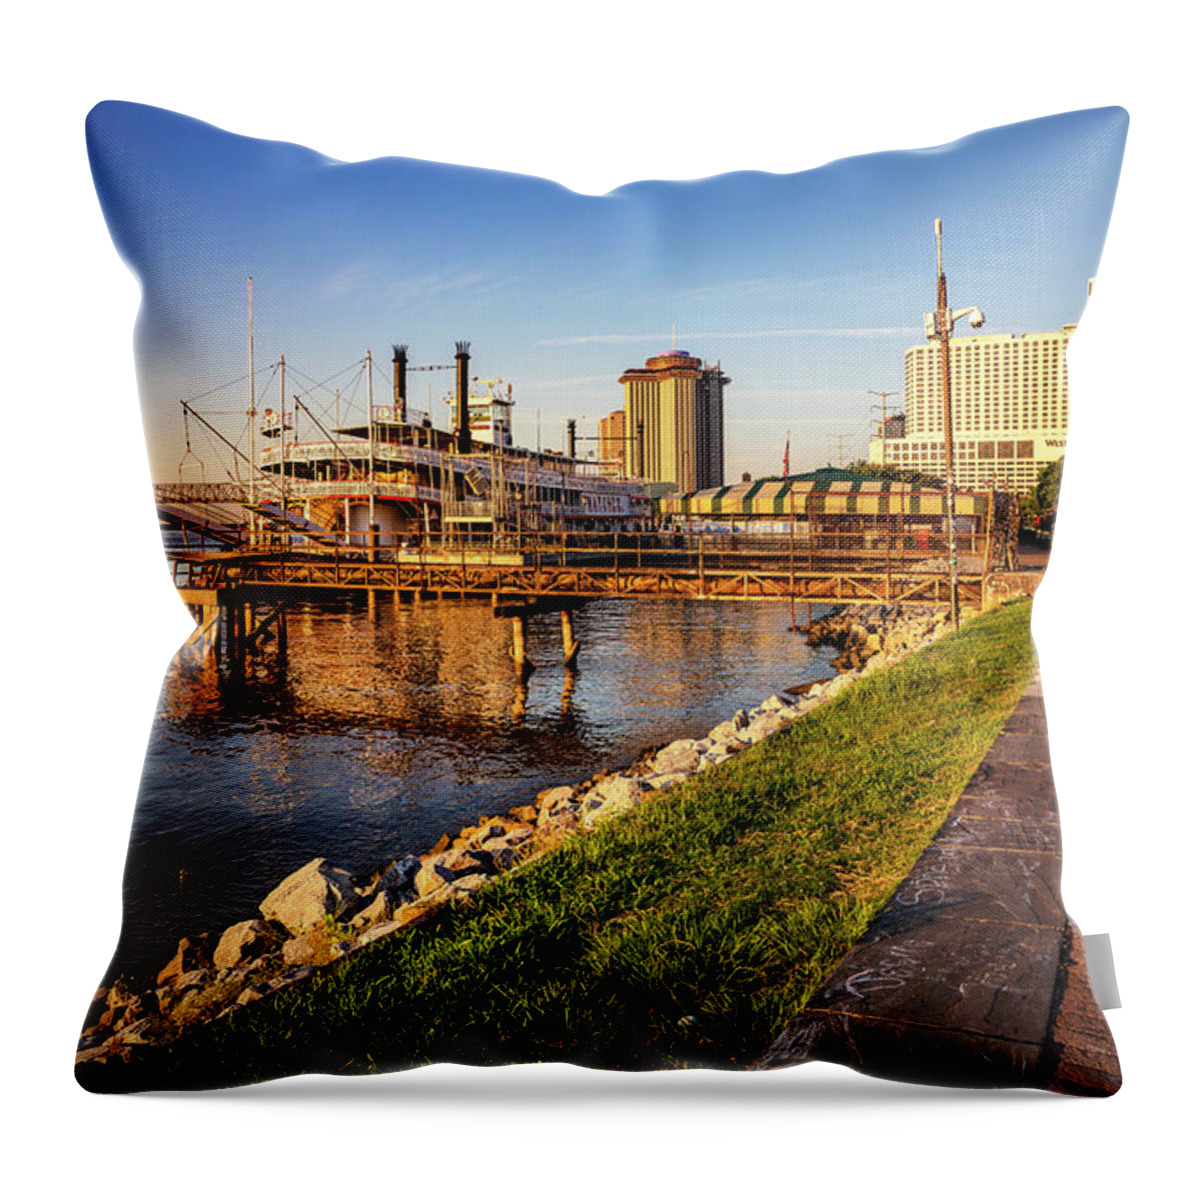 Estock Throw Pillow featuring the digital art Mississippi River, New Orleans, La by Claudia Uripos